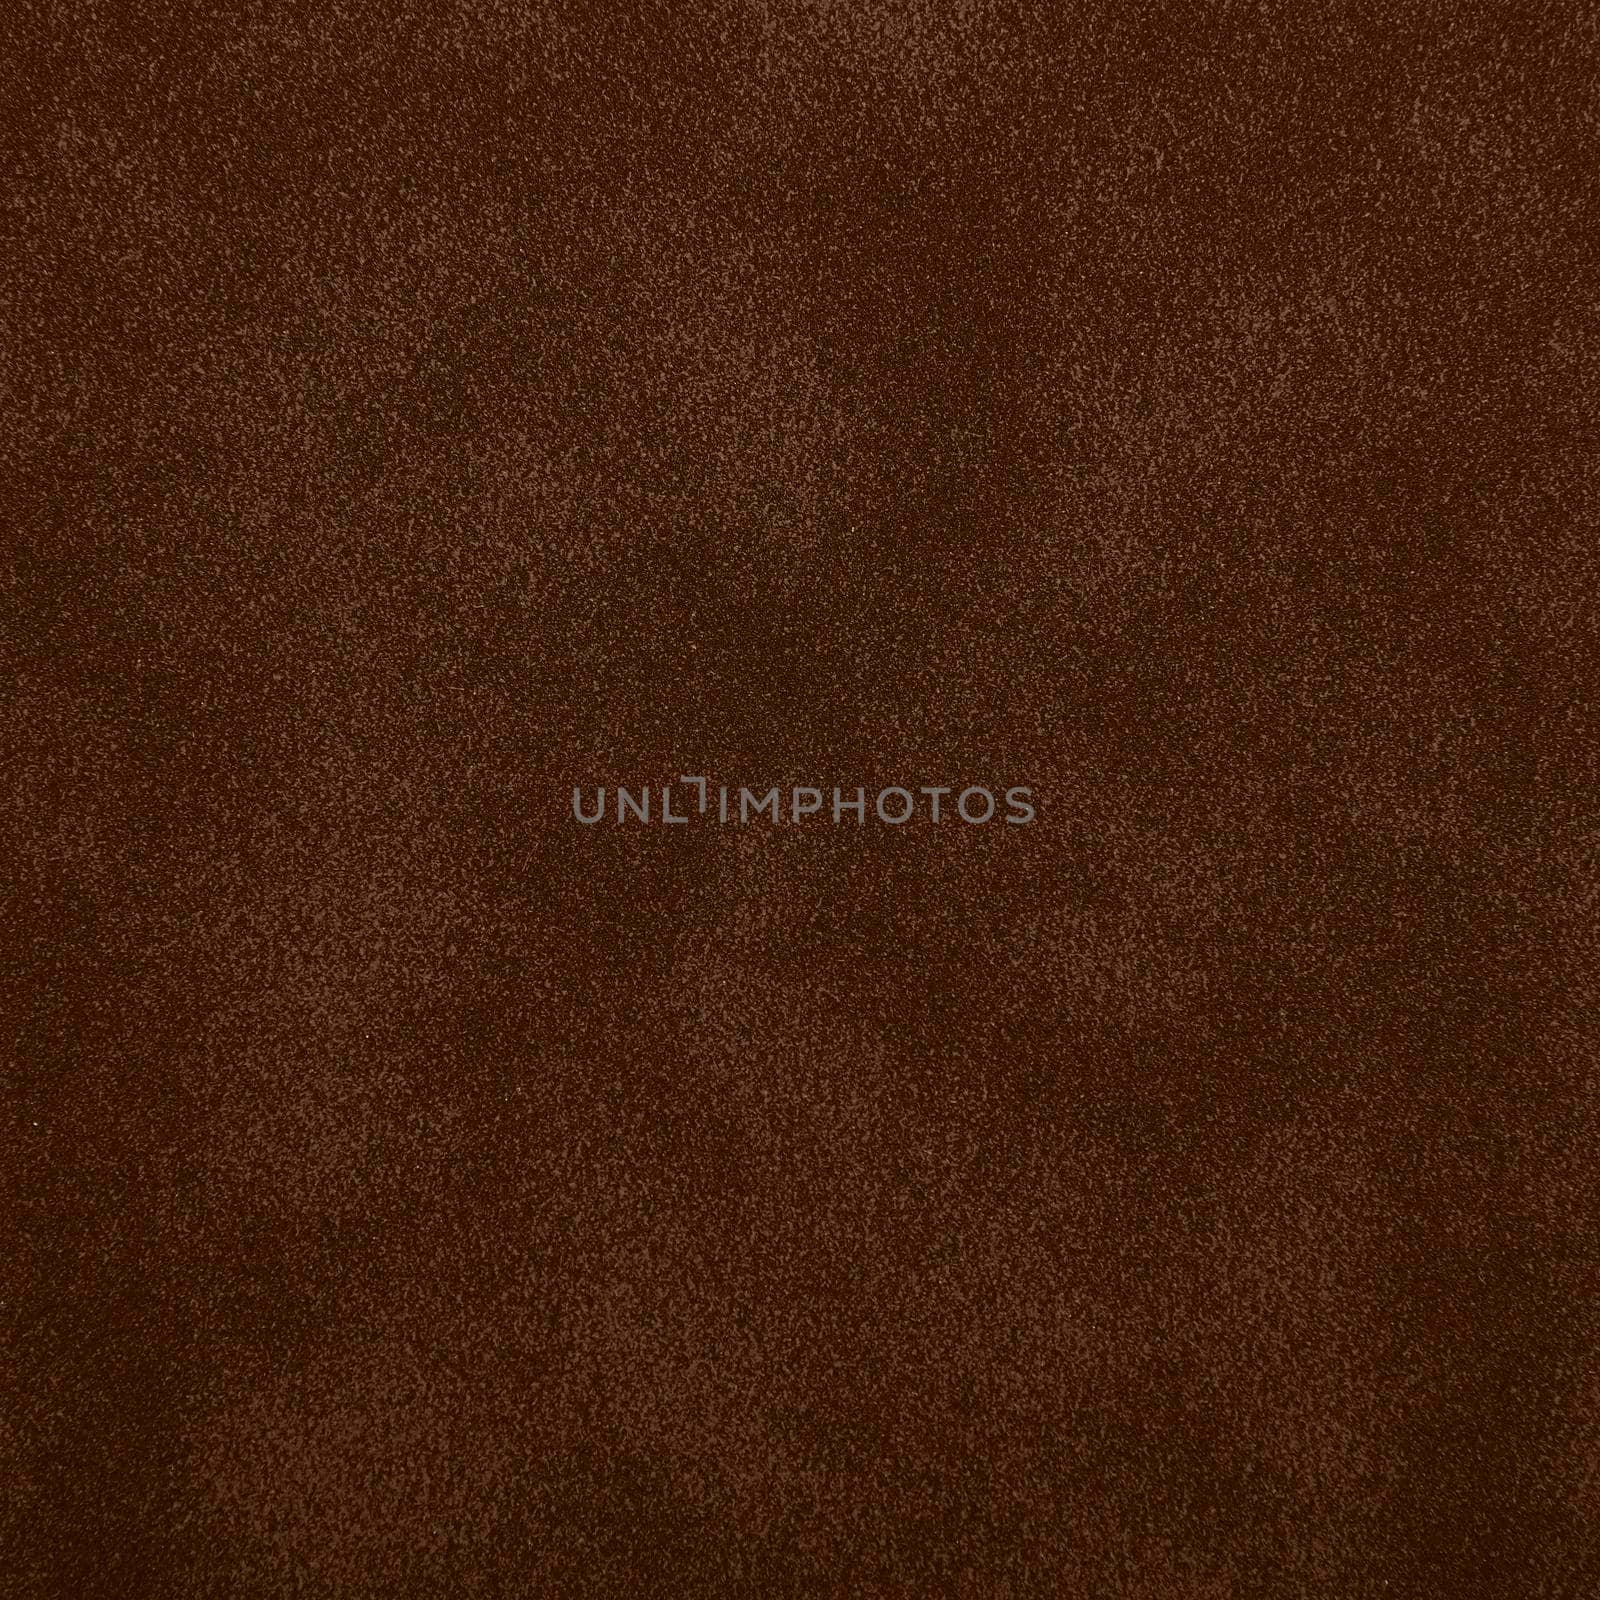 Dark brown abstract uneven grunge background texture of chamois leather grain surface pattern